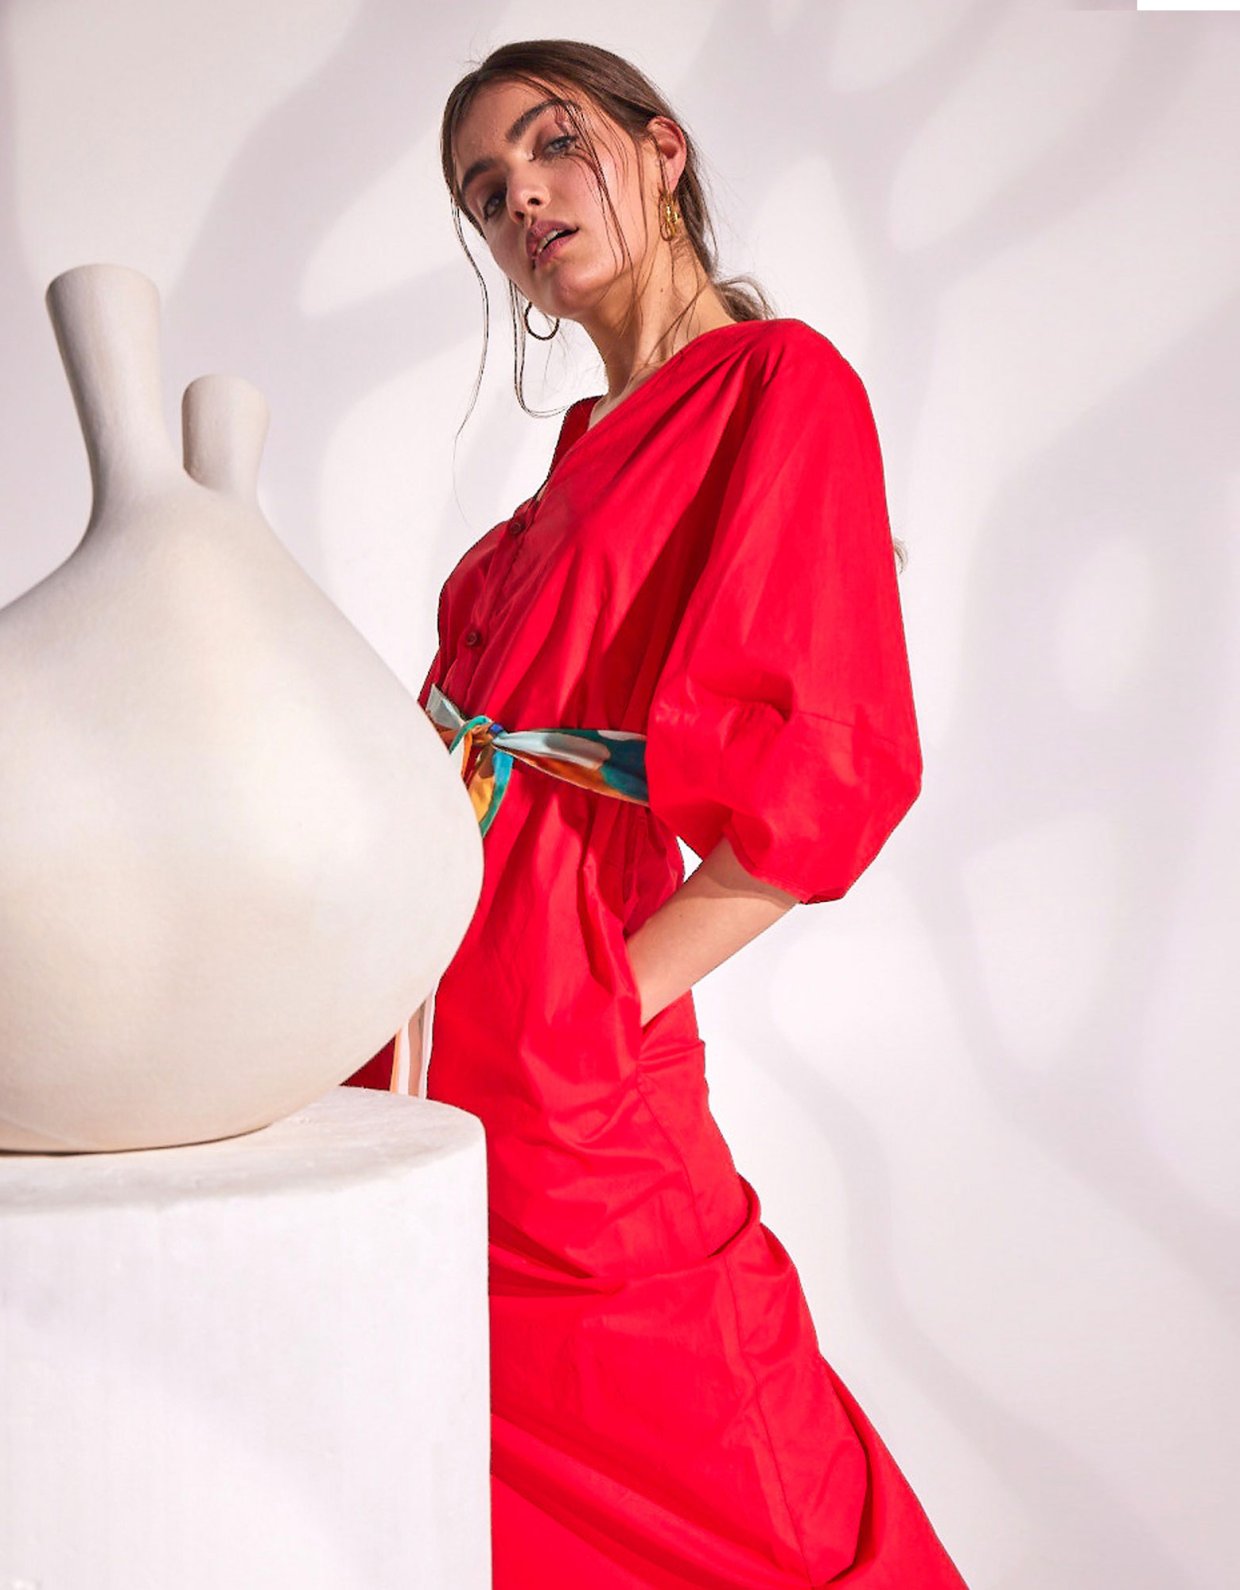 The Knl's Heritage dress red